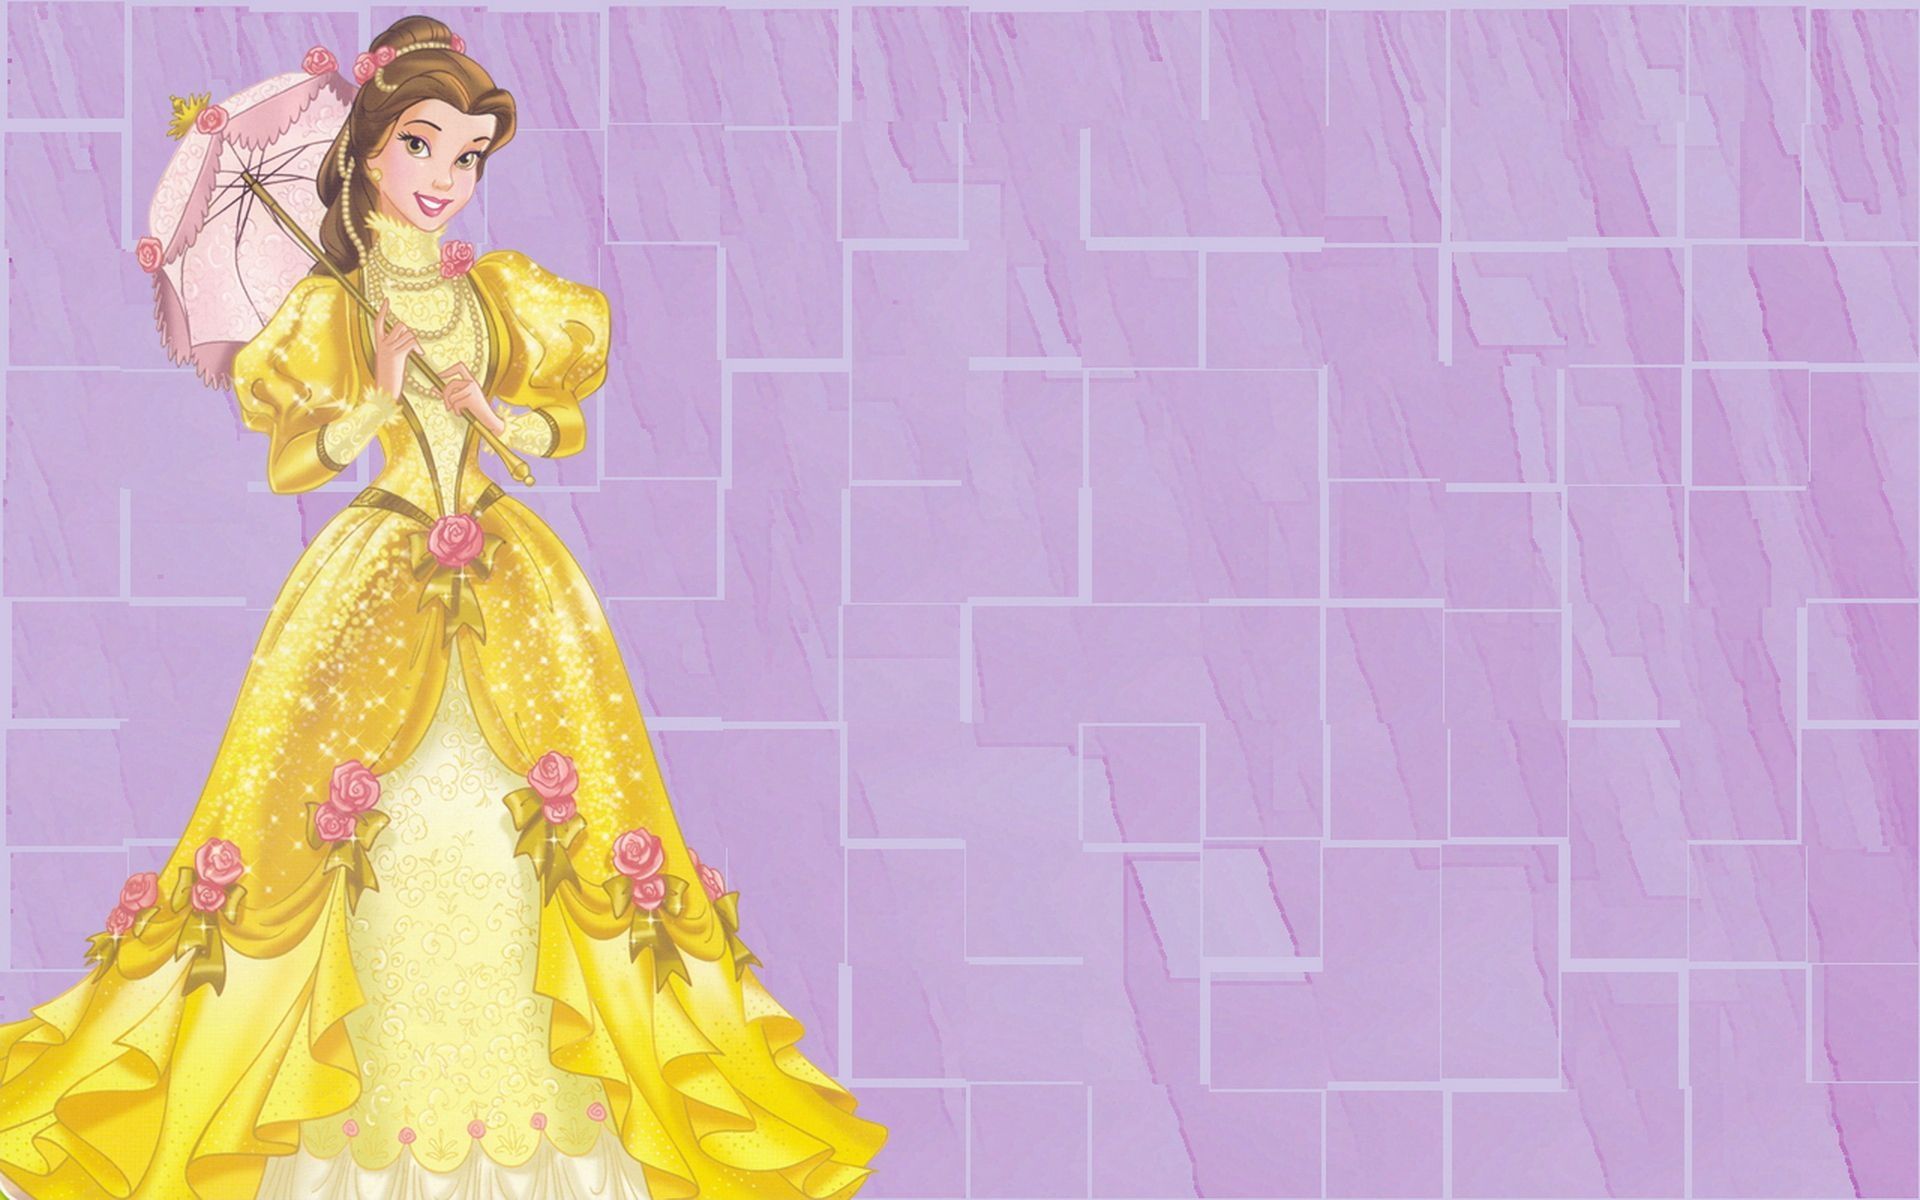 A Disney princess wallpaper of Belle from Beauty and the Beast - Belle